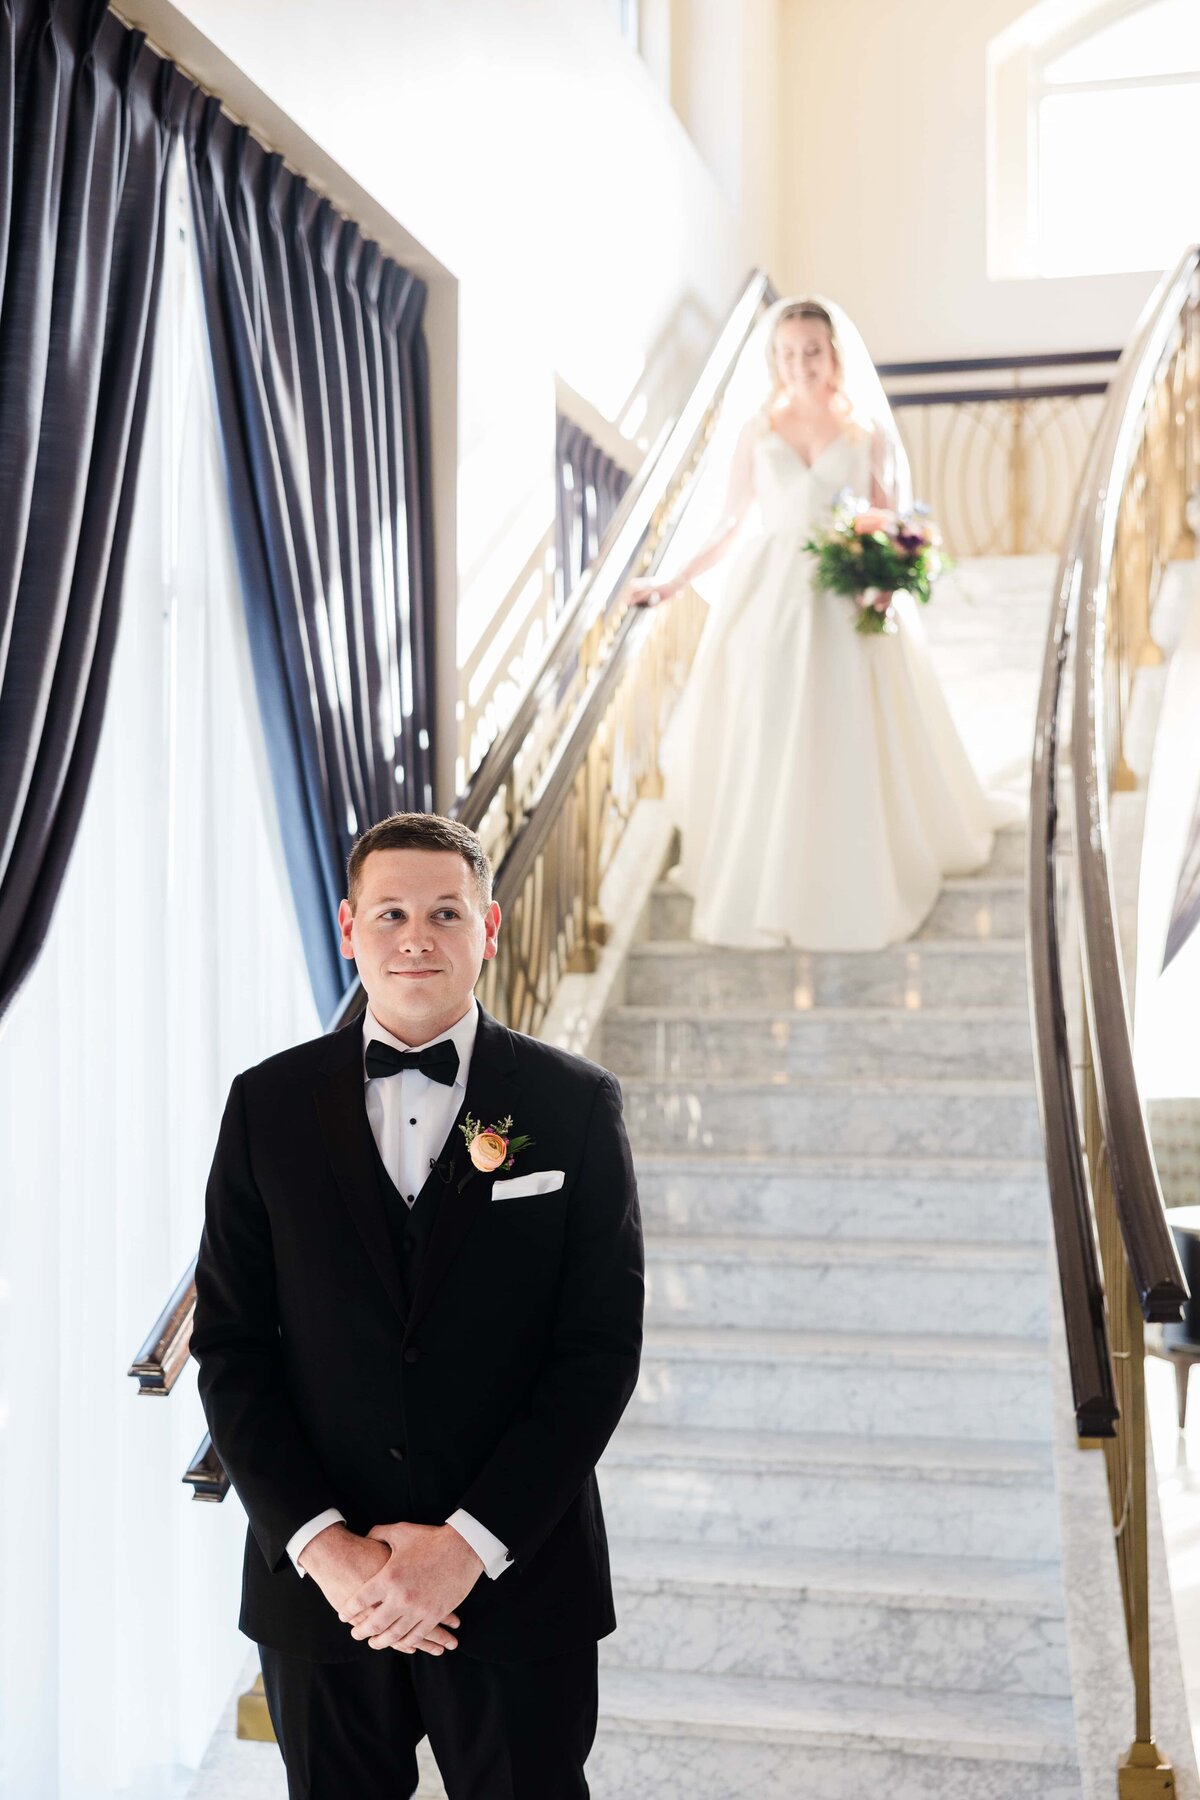 A bride in a white dress descends a staircase behind a groom in a black tuxedo waiting at the bottom, in an elegant park farm winery setting.